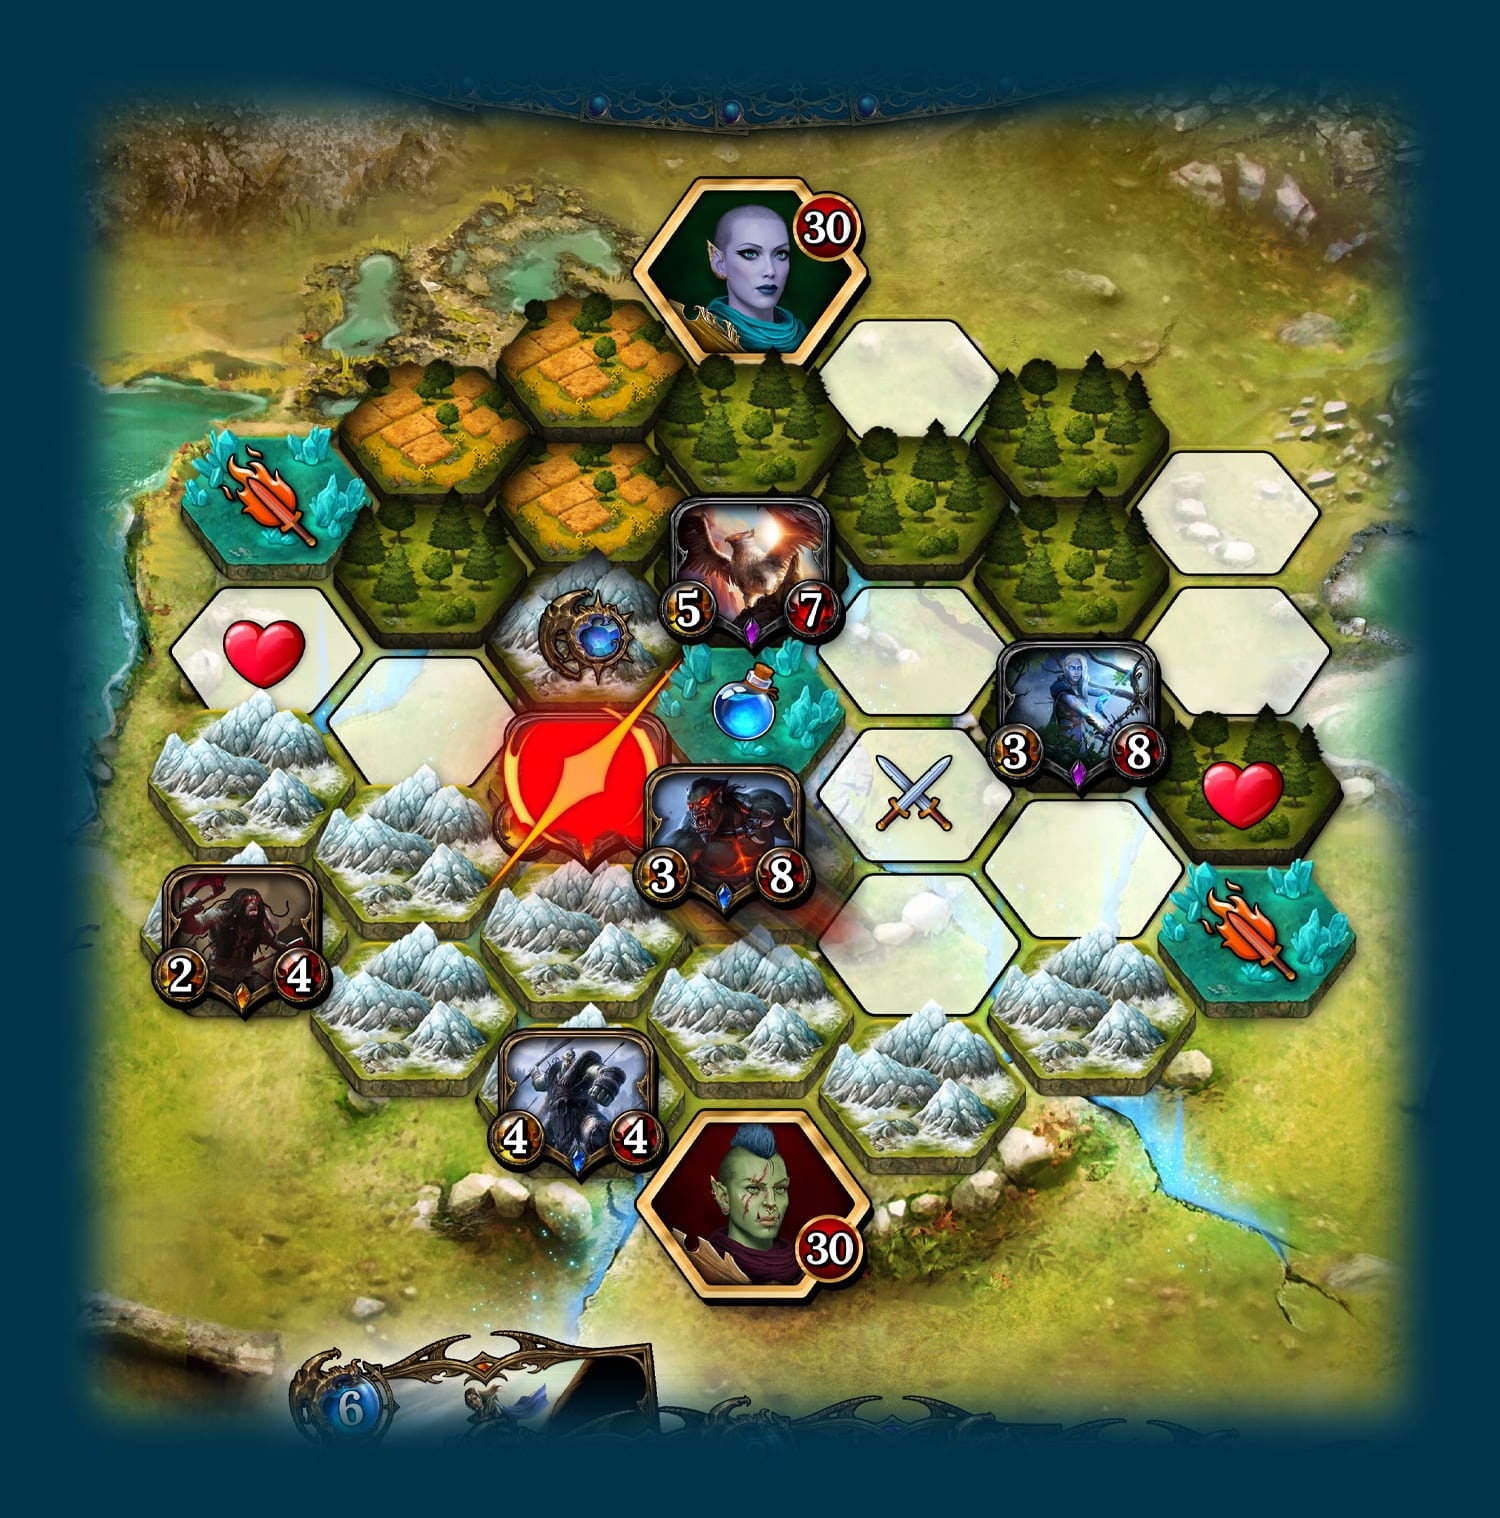 Gameplay in Legends of Elysium, where strategy meets fantasy in a unique blend of collectible card and board game elements.Legends of Elysium combines mechanics known from trading card games such as Magic the Gathering, Hearthstone and Pokemon with mechanics known from board games such as Catan, Terra Mystica and Neuroshima Hex. 